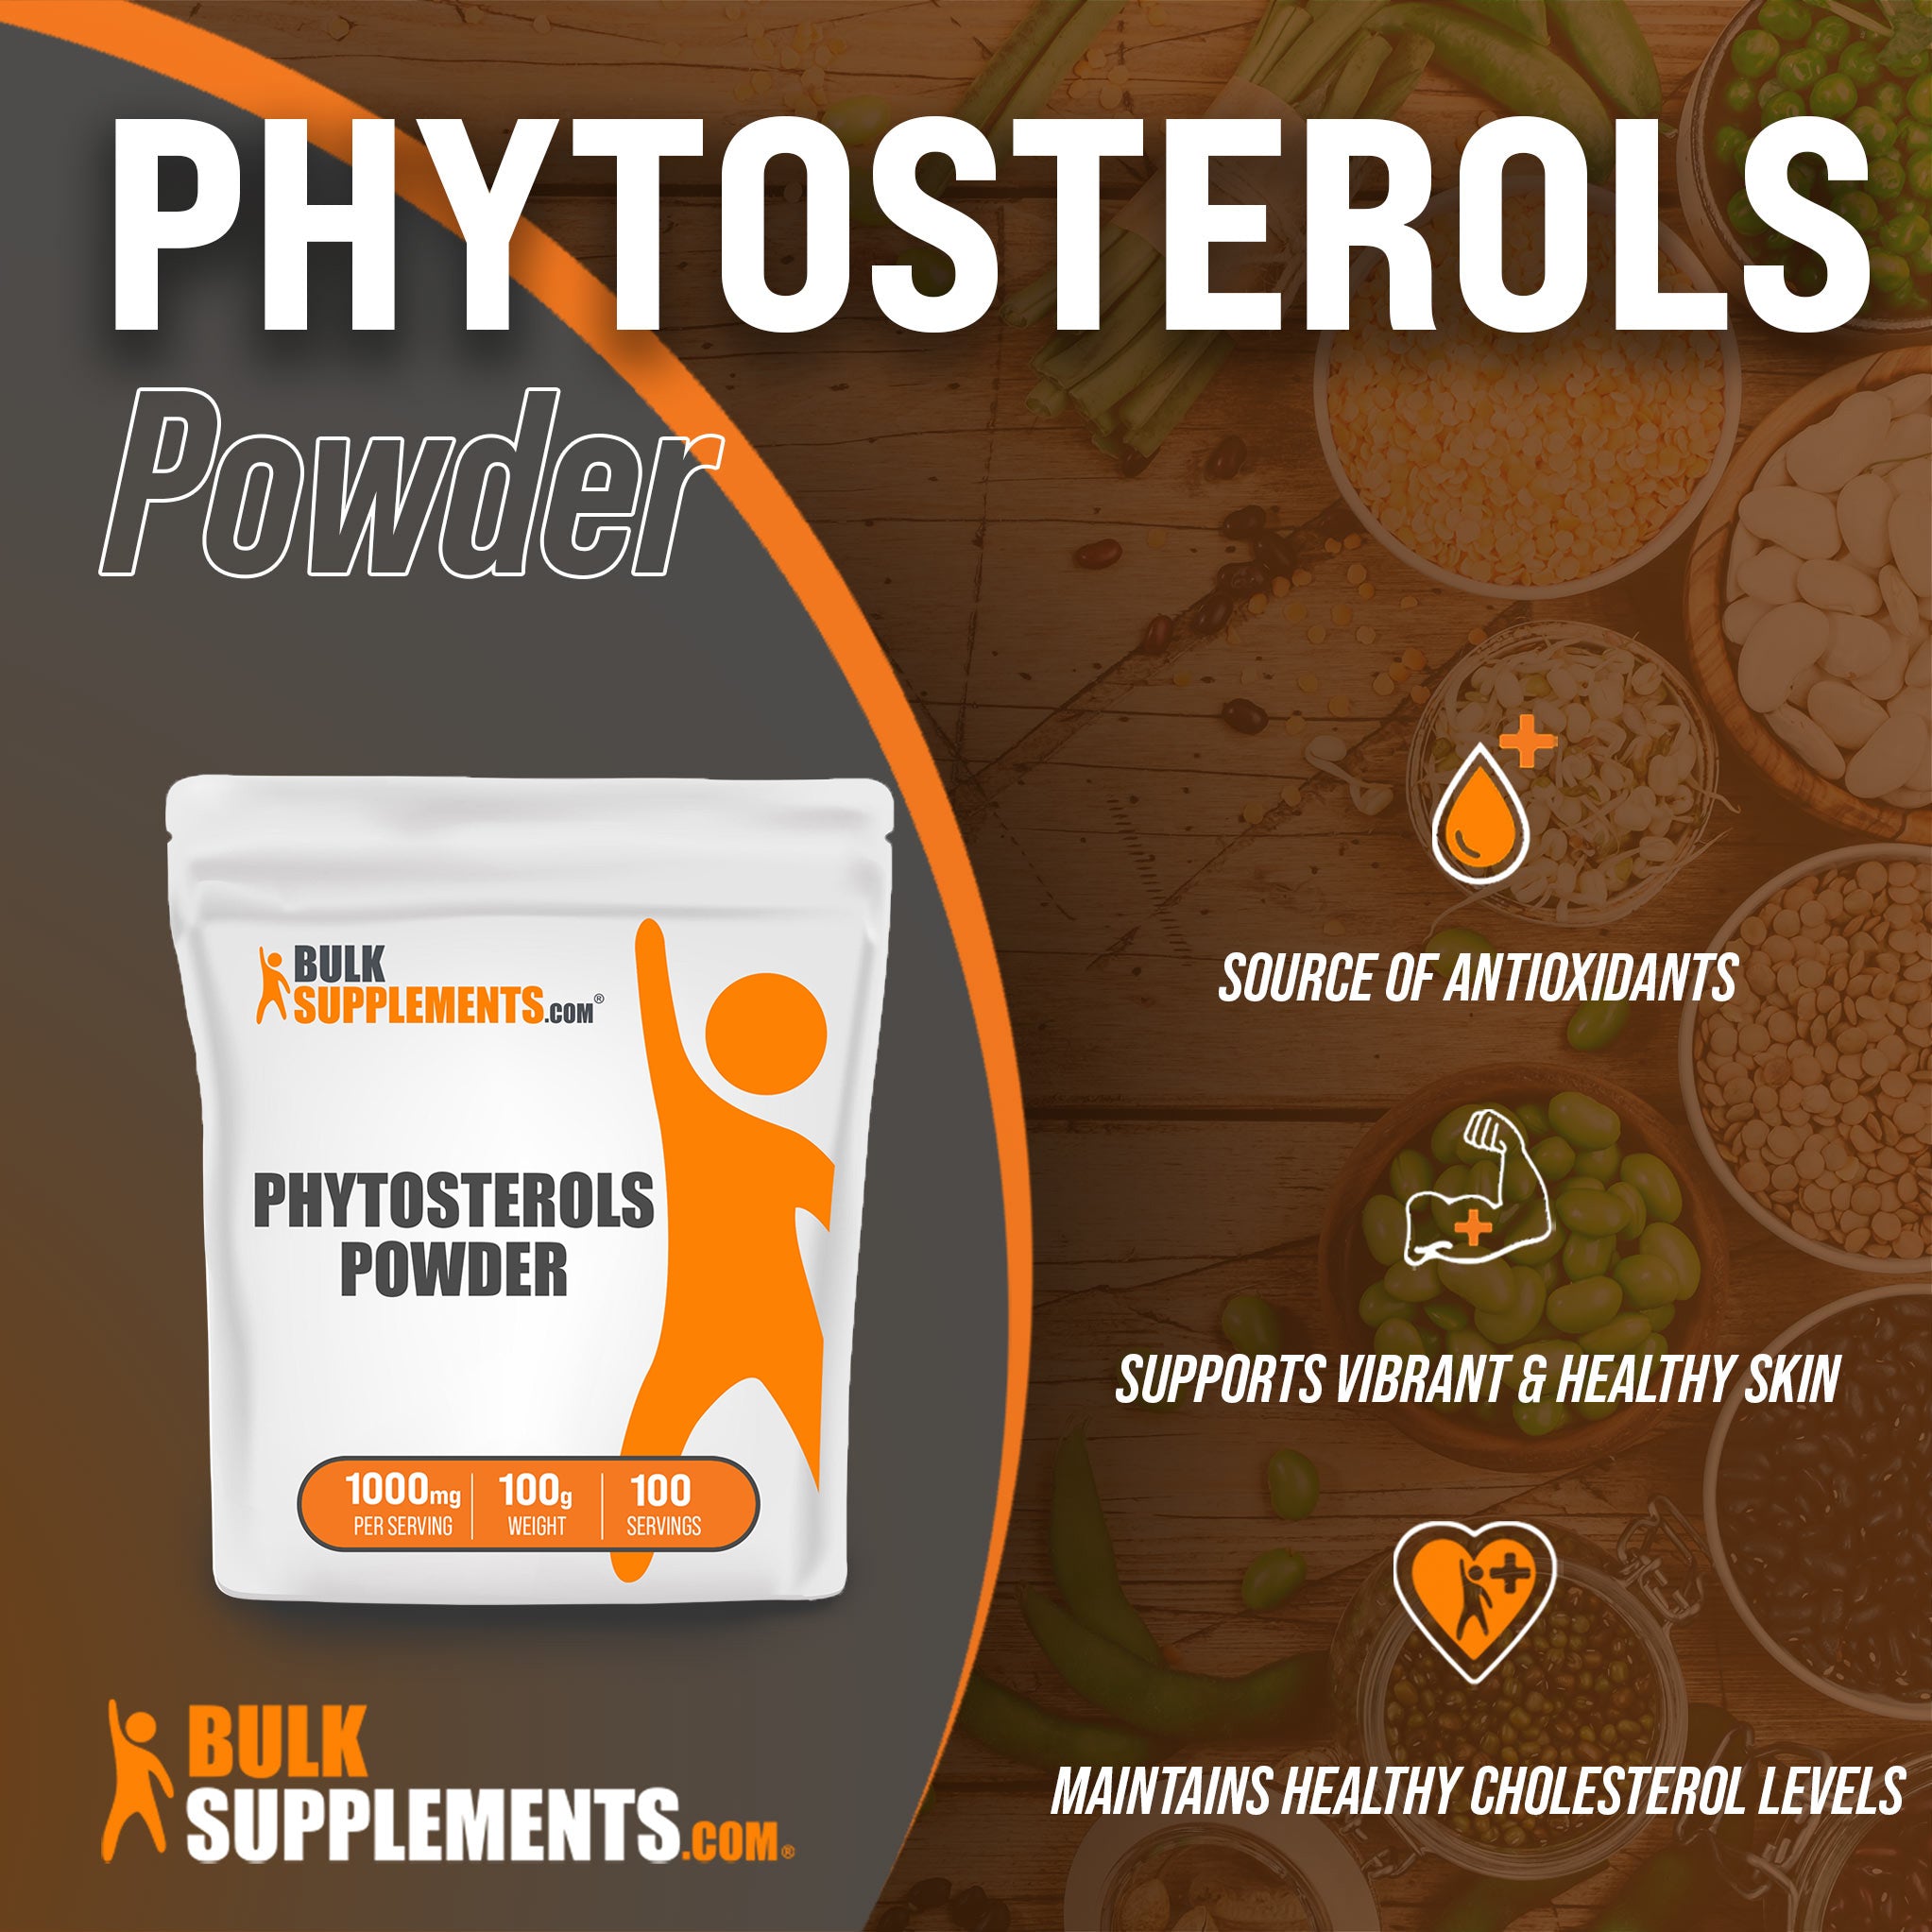 Benefits of Phytosterols: source of antioxidants, supports vibrant and healthy skin, maintains healthy cholesterol levels